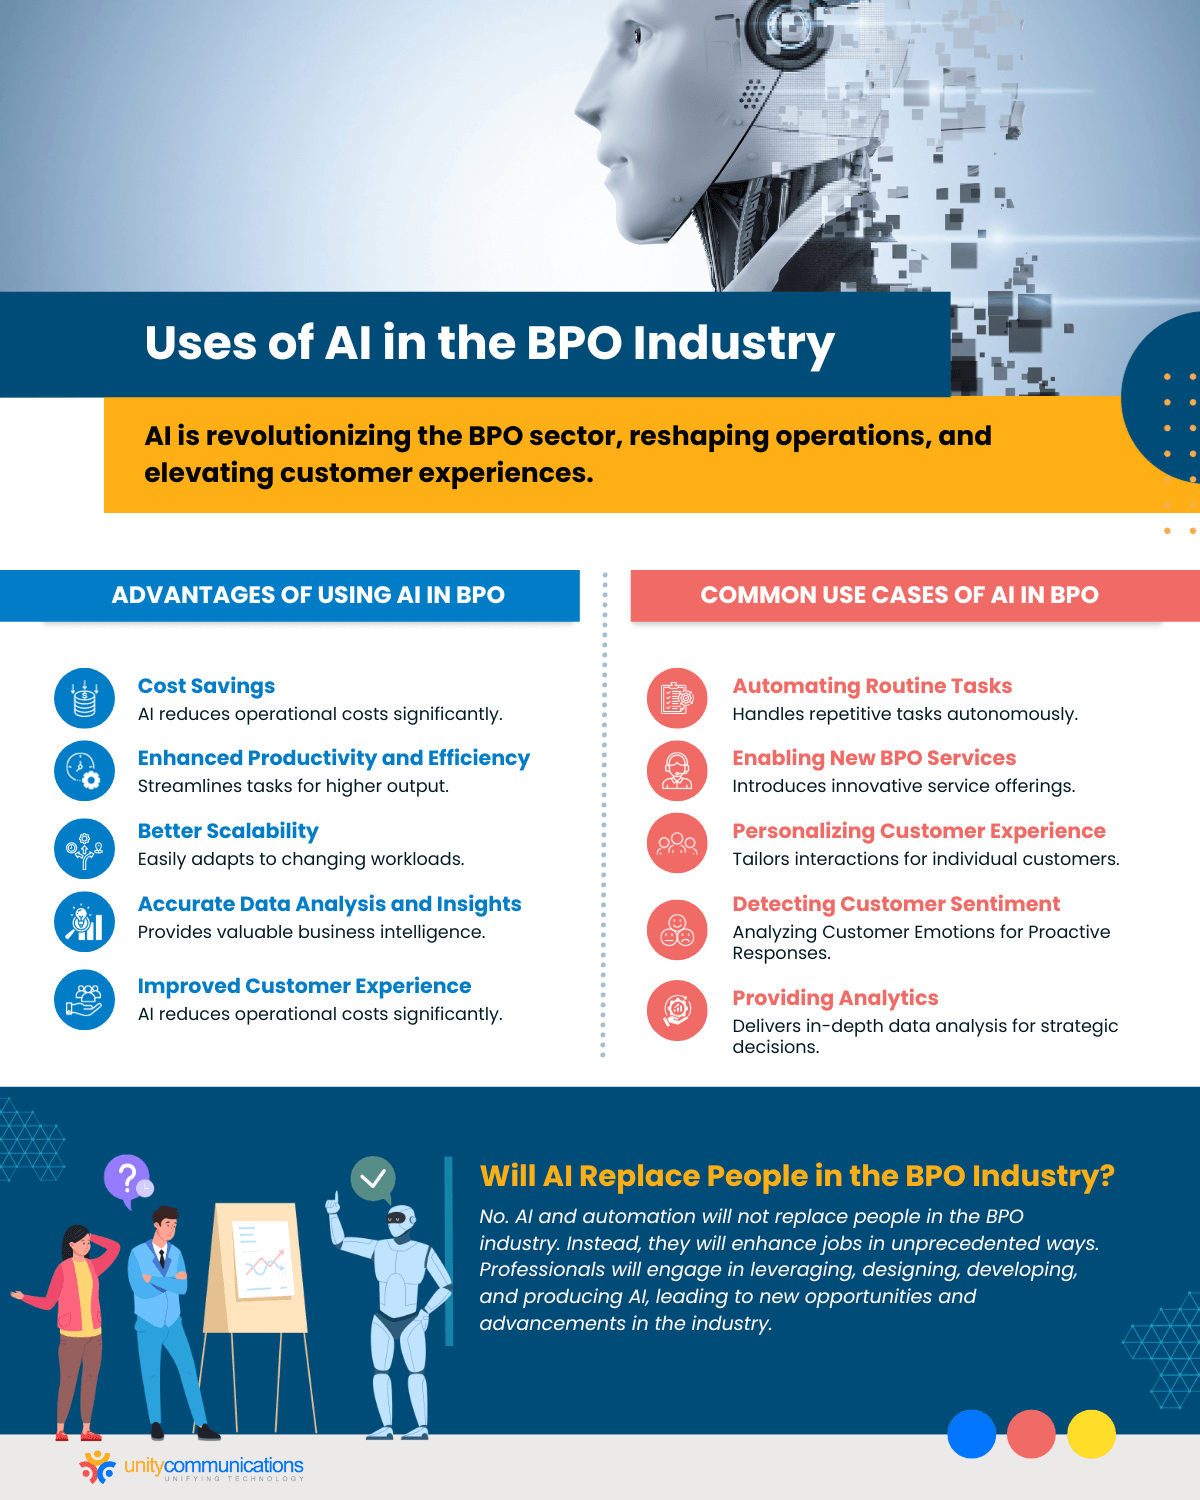 Uses of AI in the BPO Industry